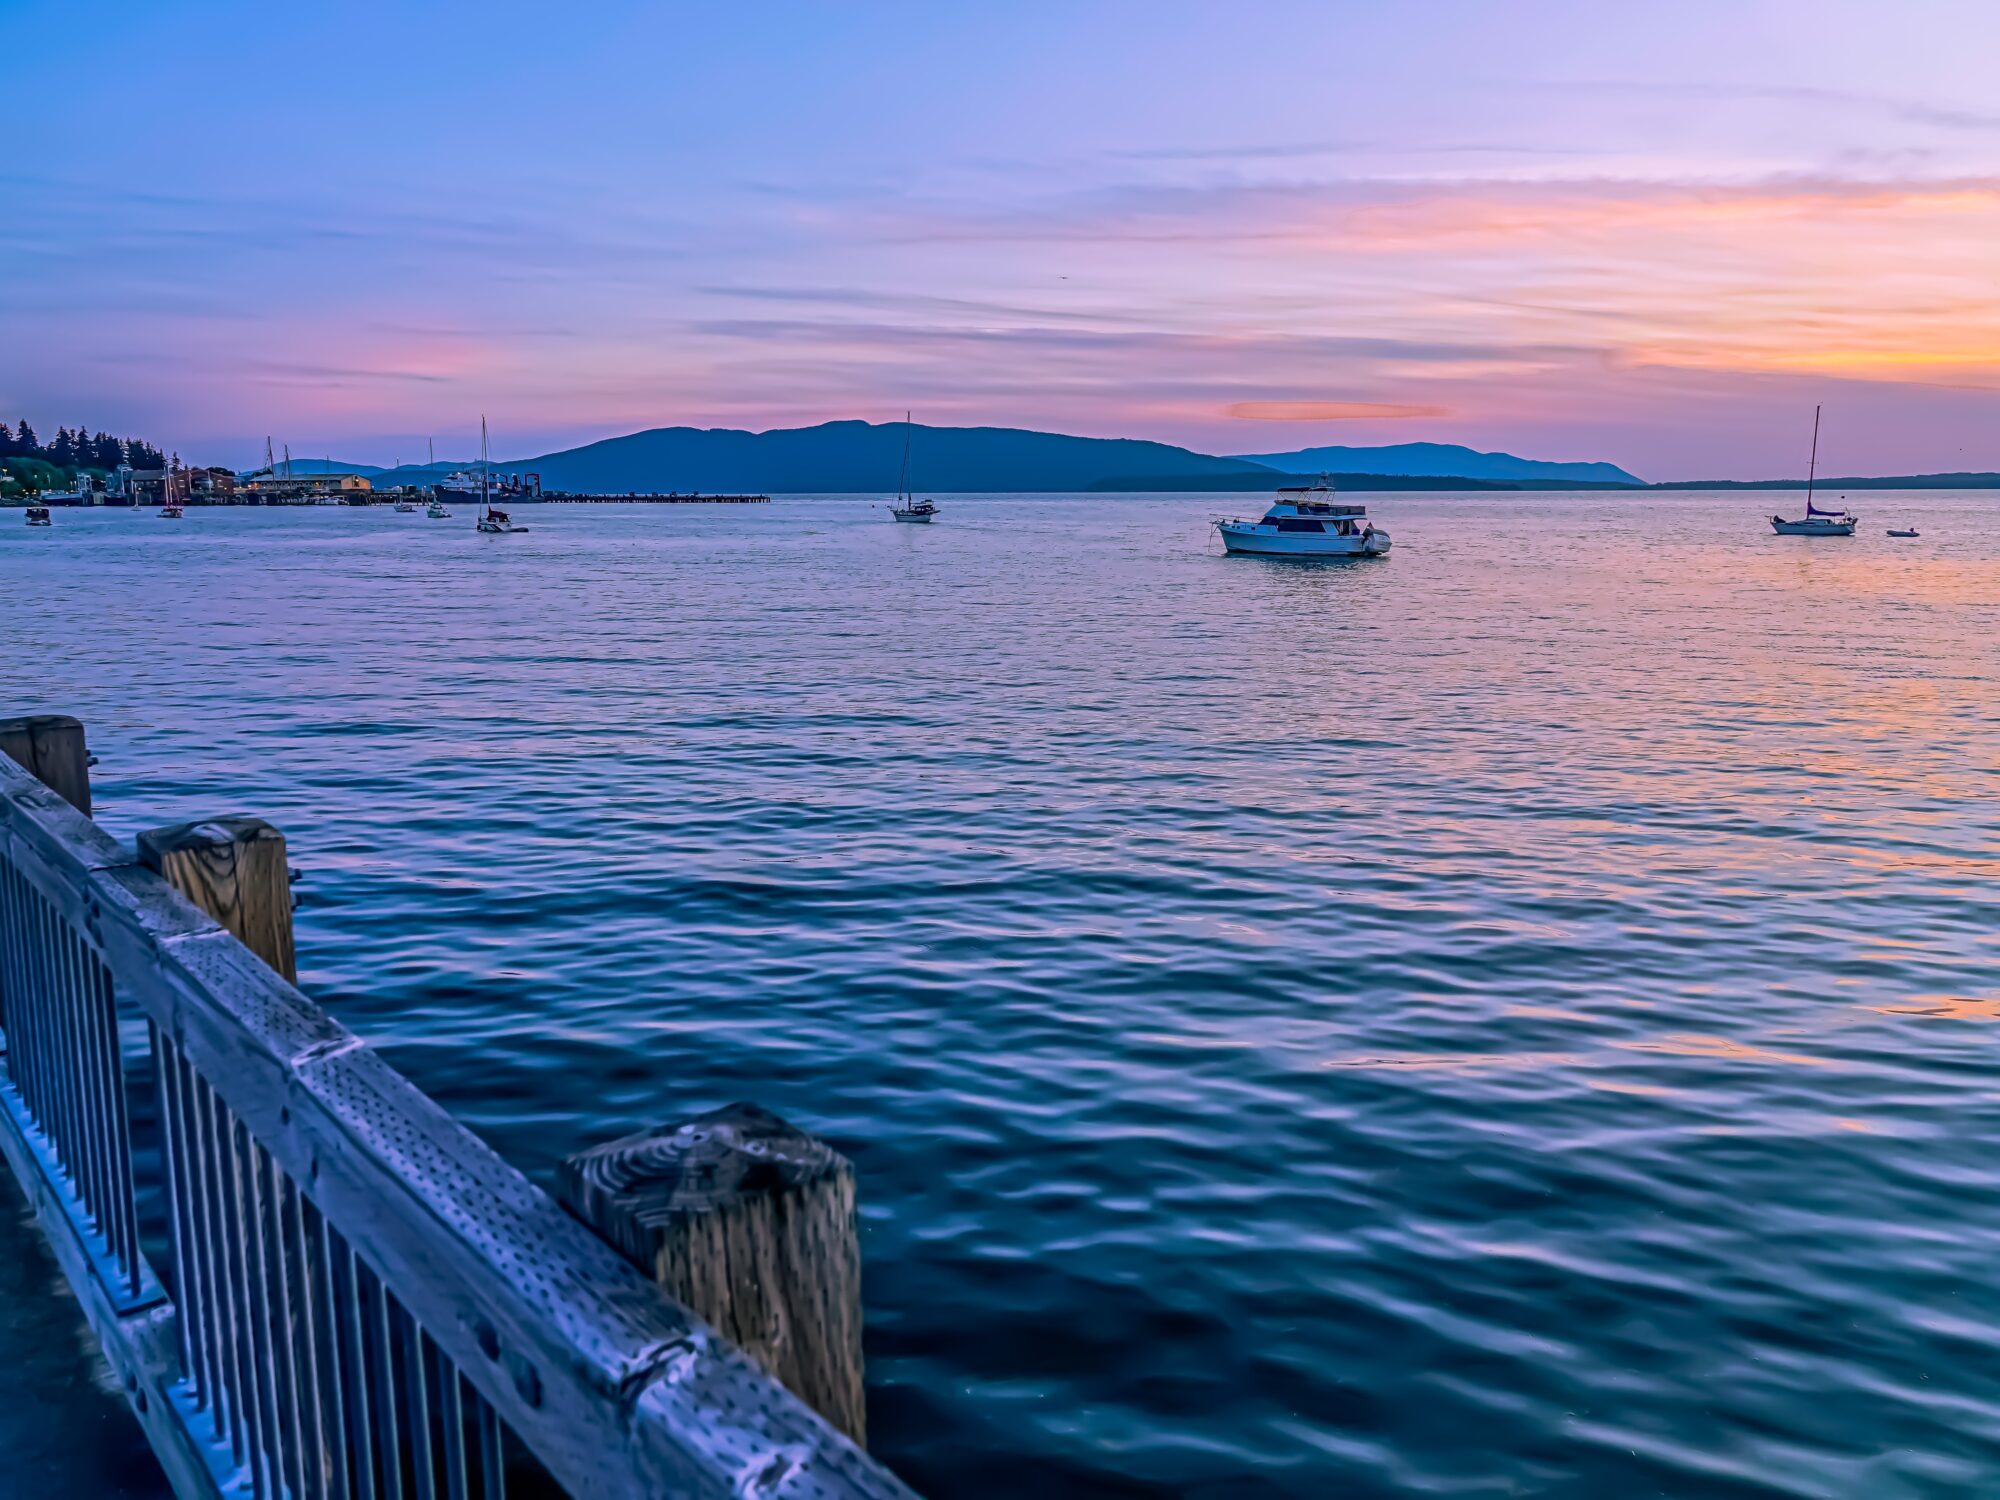 bellingham bay from taylor dock attracting tourists with colorful coastal sunset